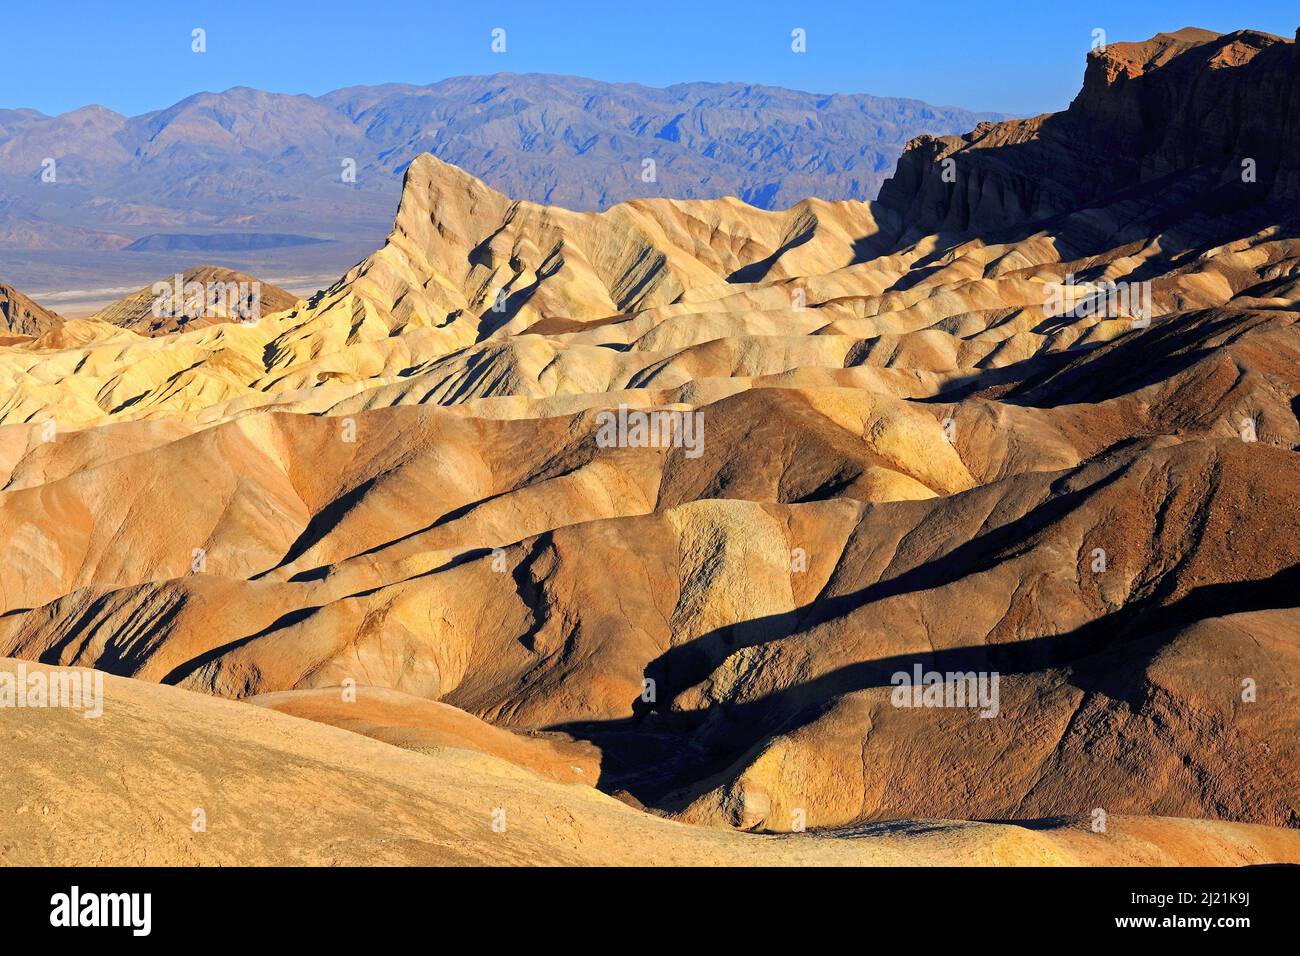 Colozurful rock formation at the Zabriske Point at sunrise, USA, California, Death Valley National Park Stock Photo